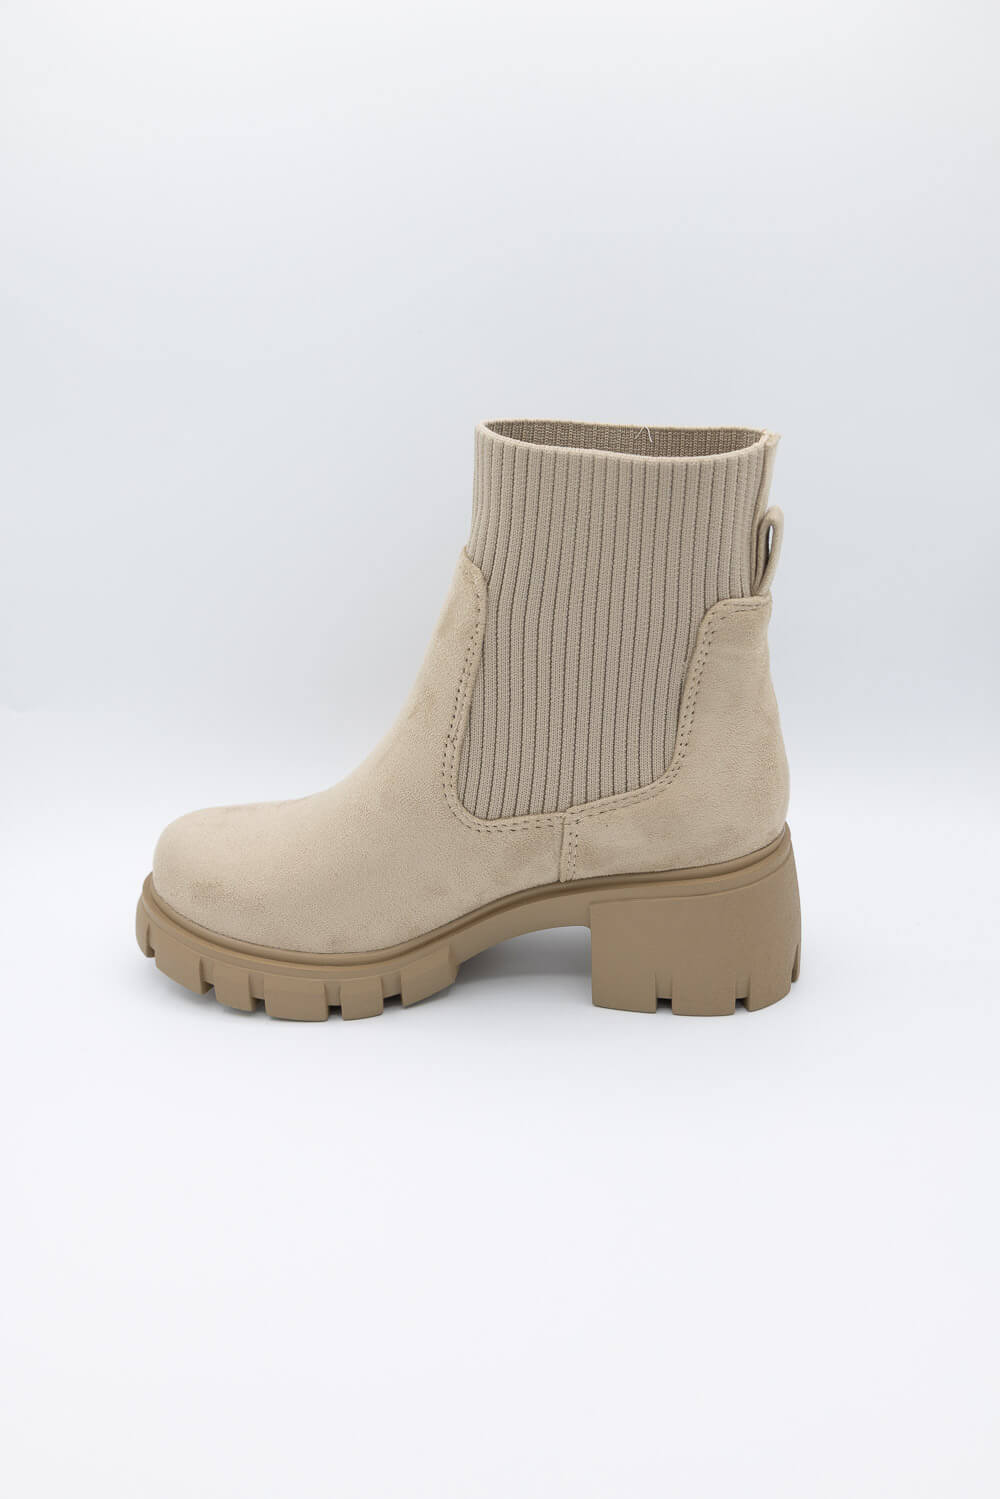 Soda Shoes Zordy Lug Booties for Women in Light Brown | ZORDY-S LT WHE ...